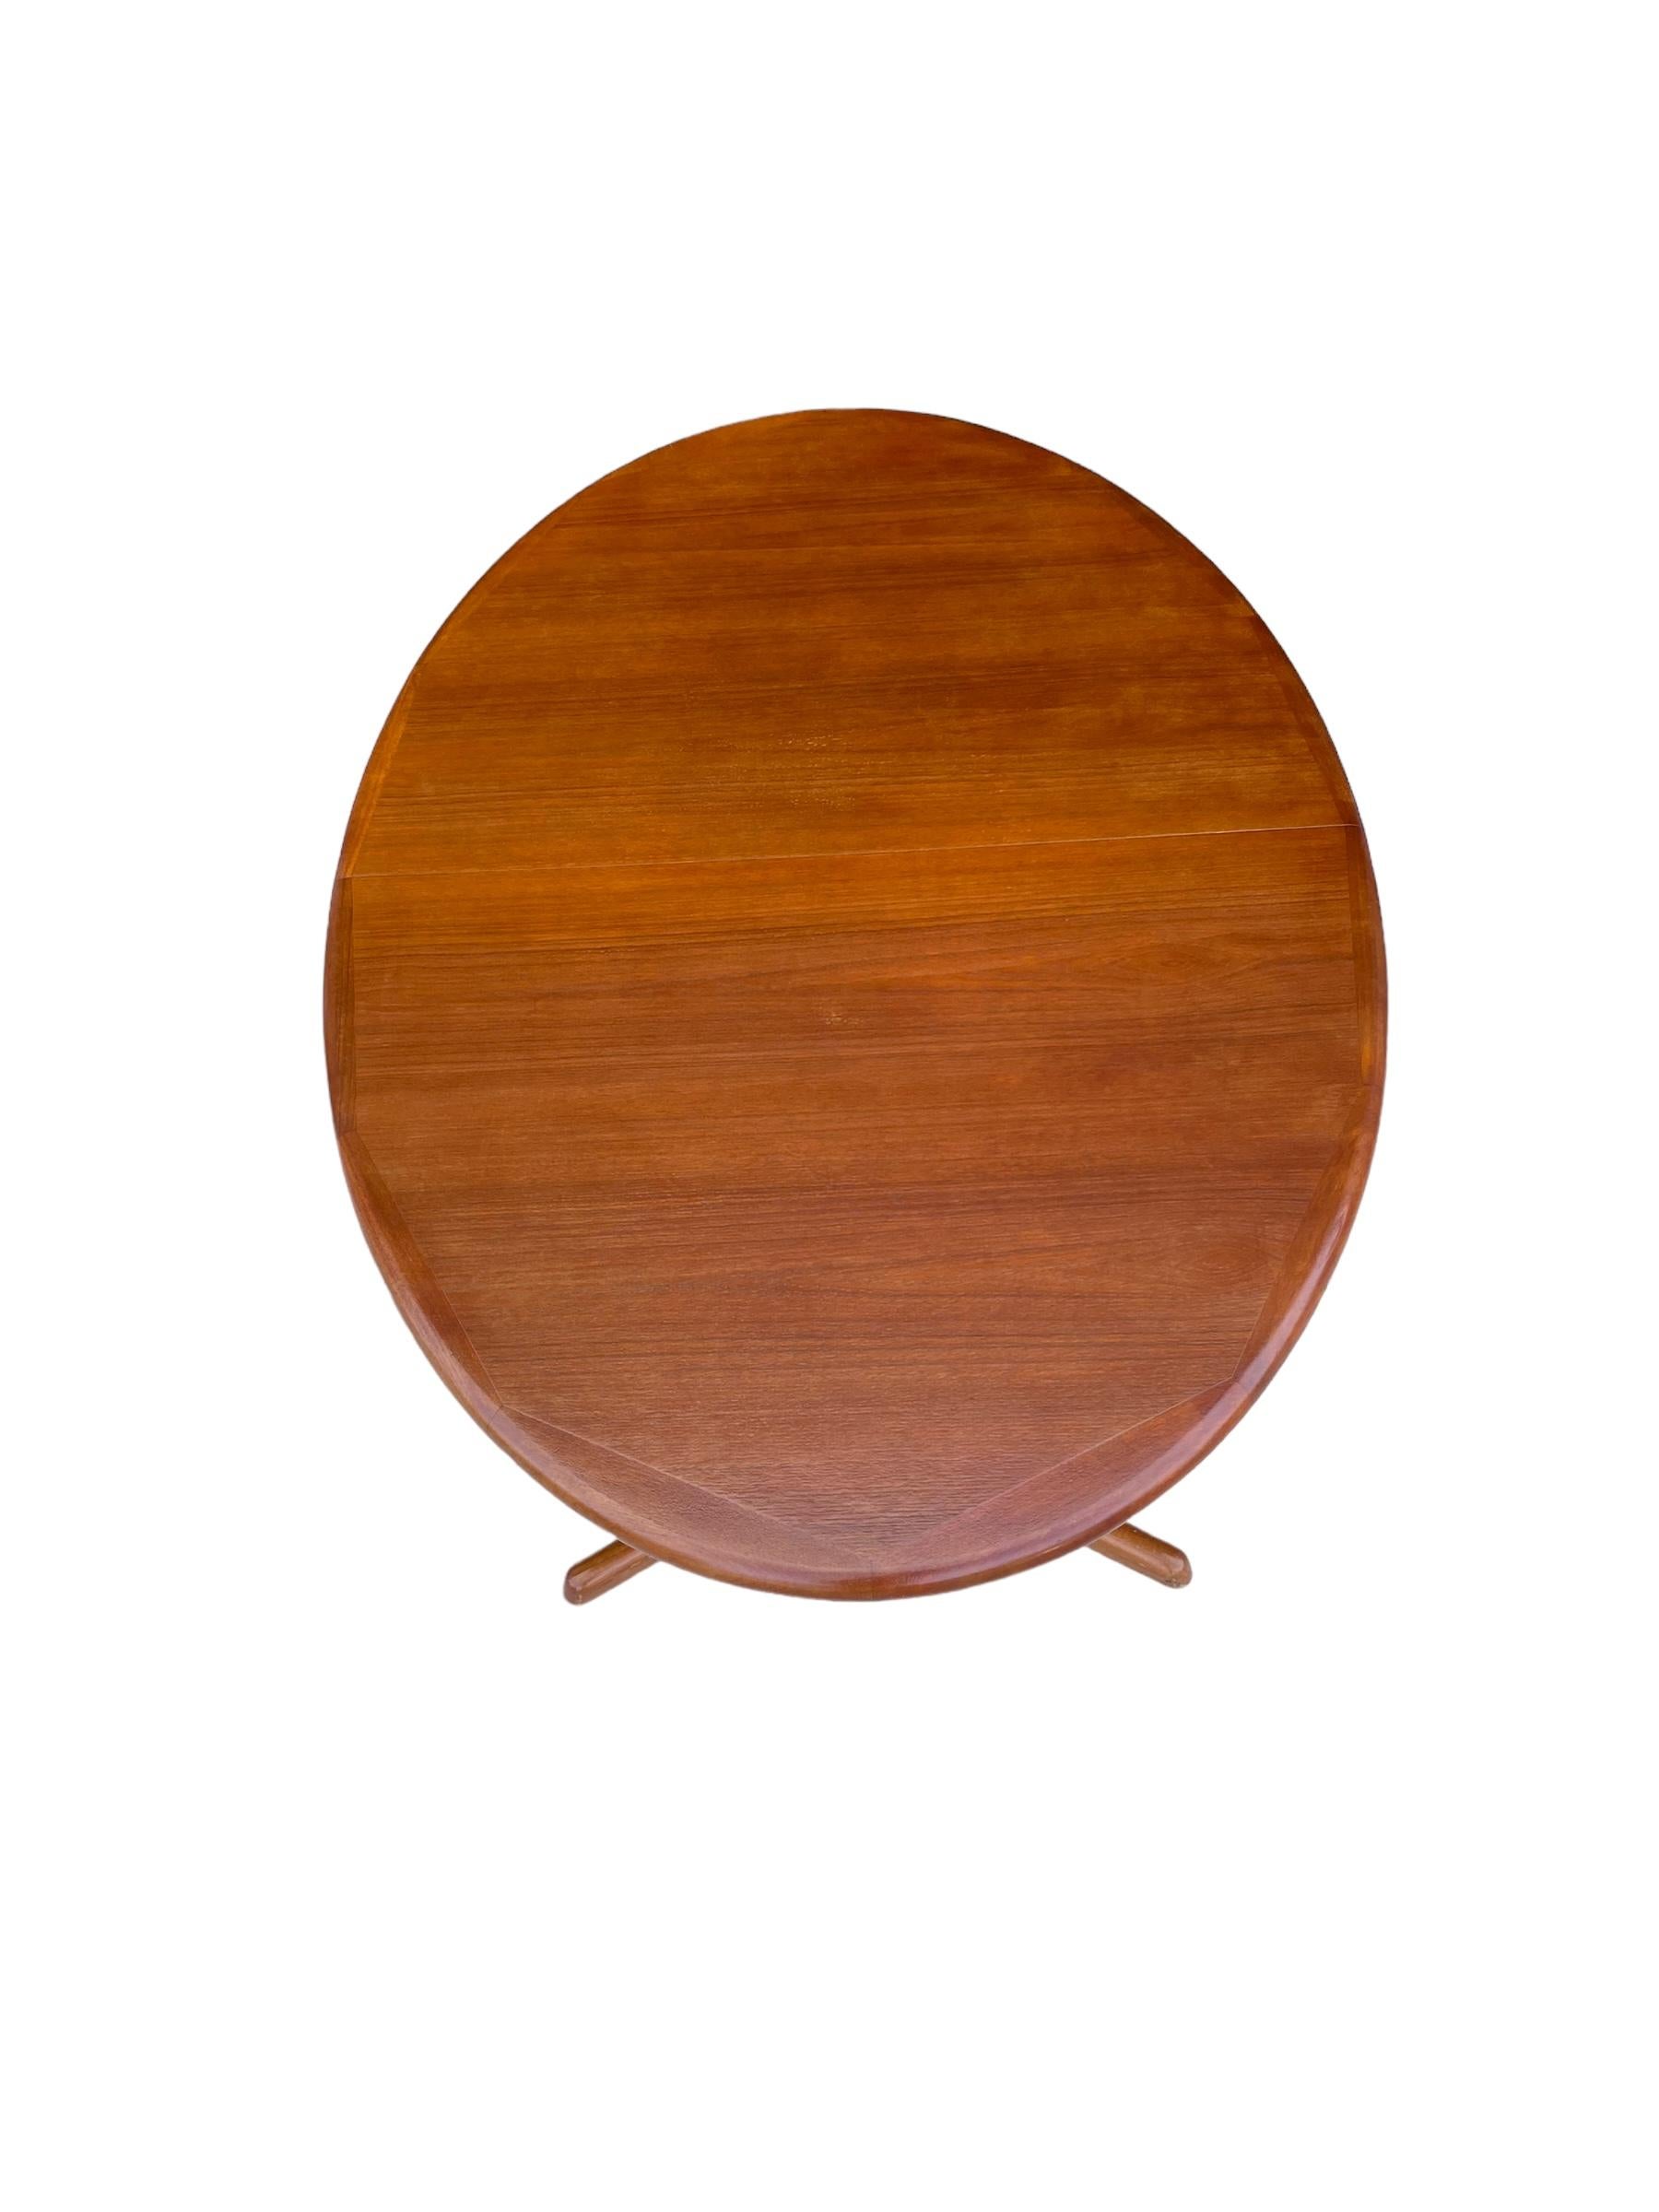 20th Century Danish Oval Dining Table in Teak by Dyrlund For Sale